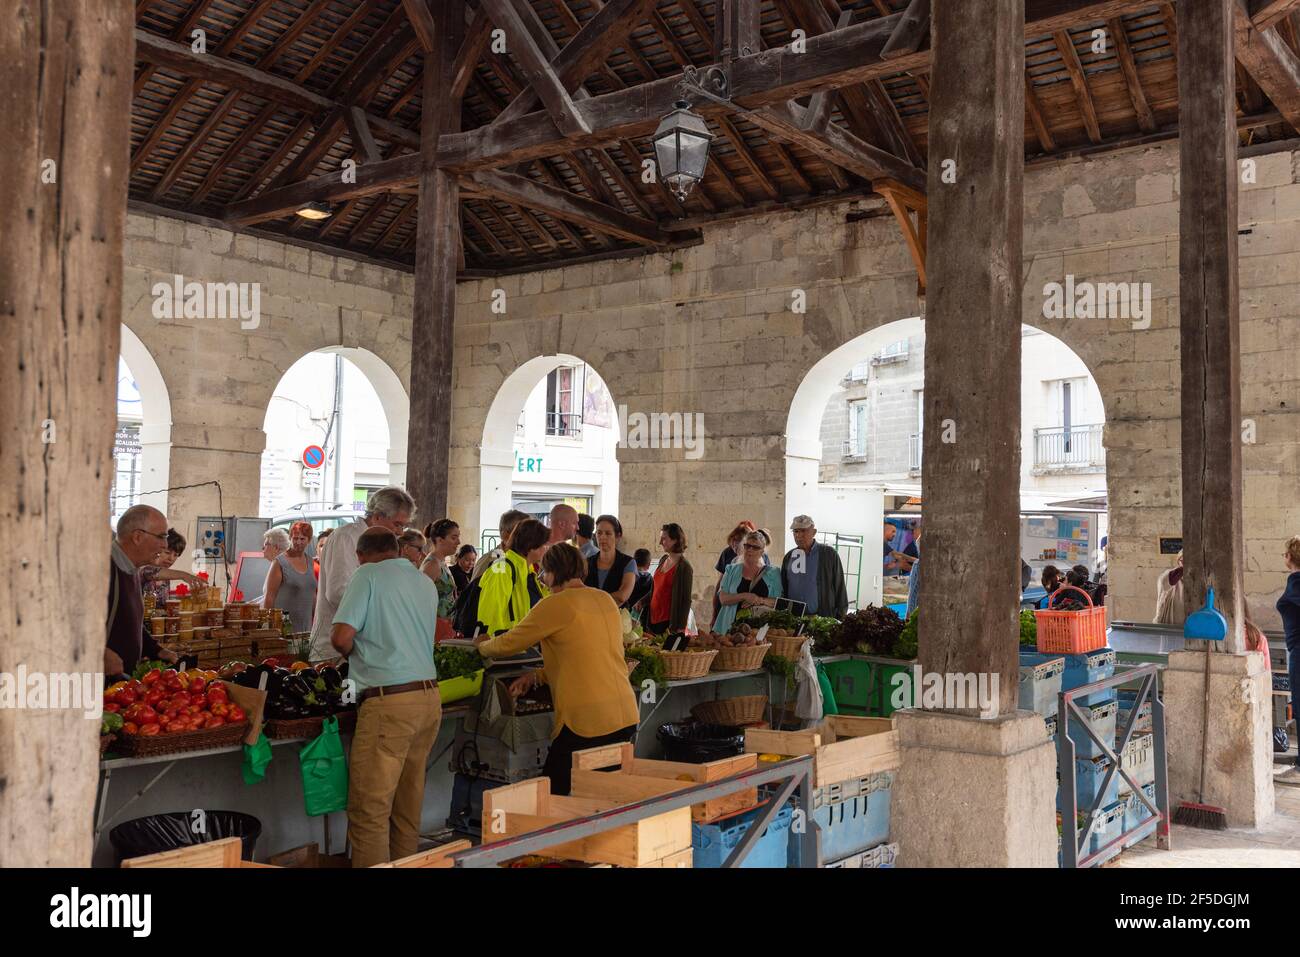 The covered market in the wine town of Bourgeuil in the Indre et Loire region of France Stock Photo